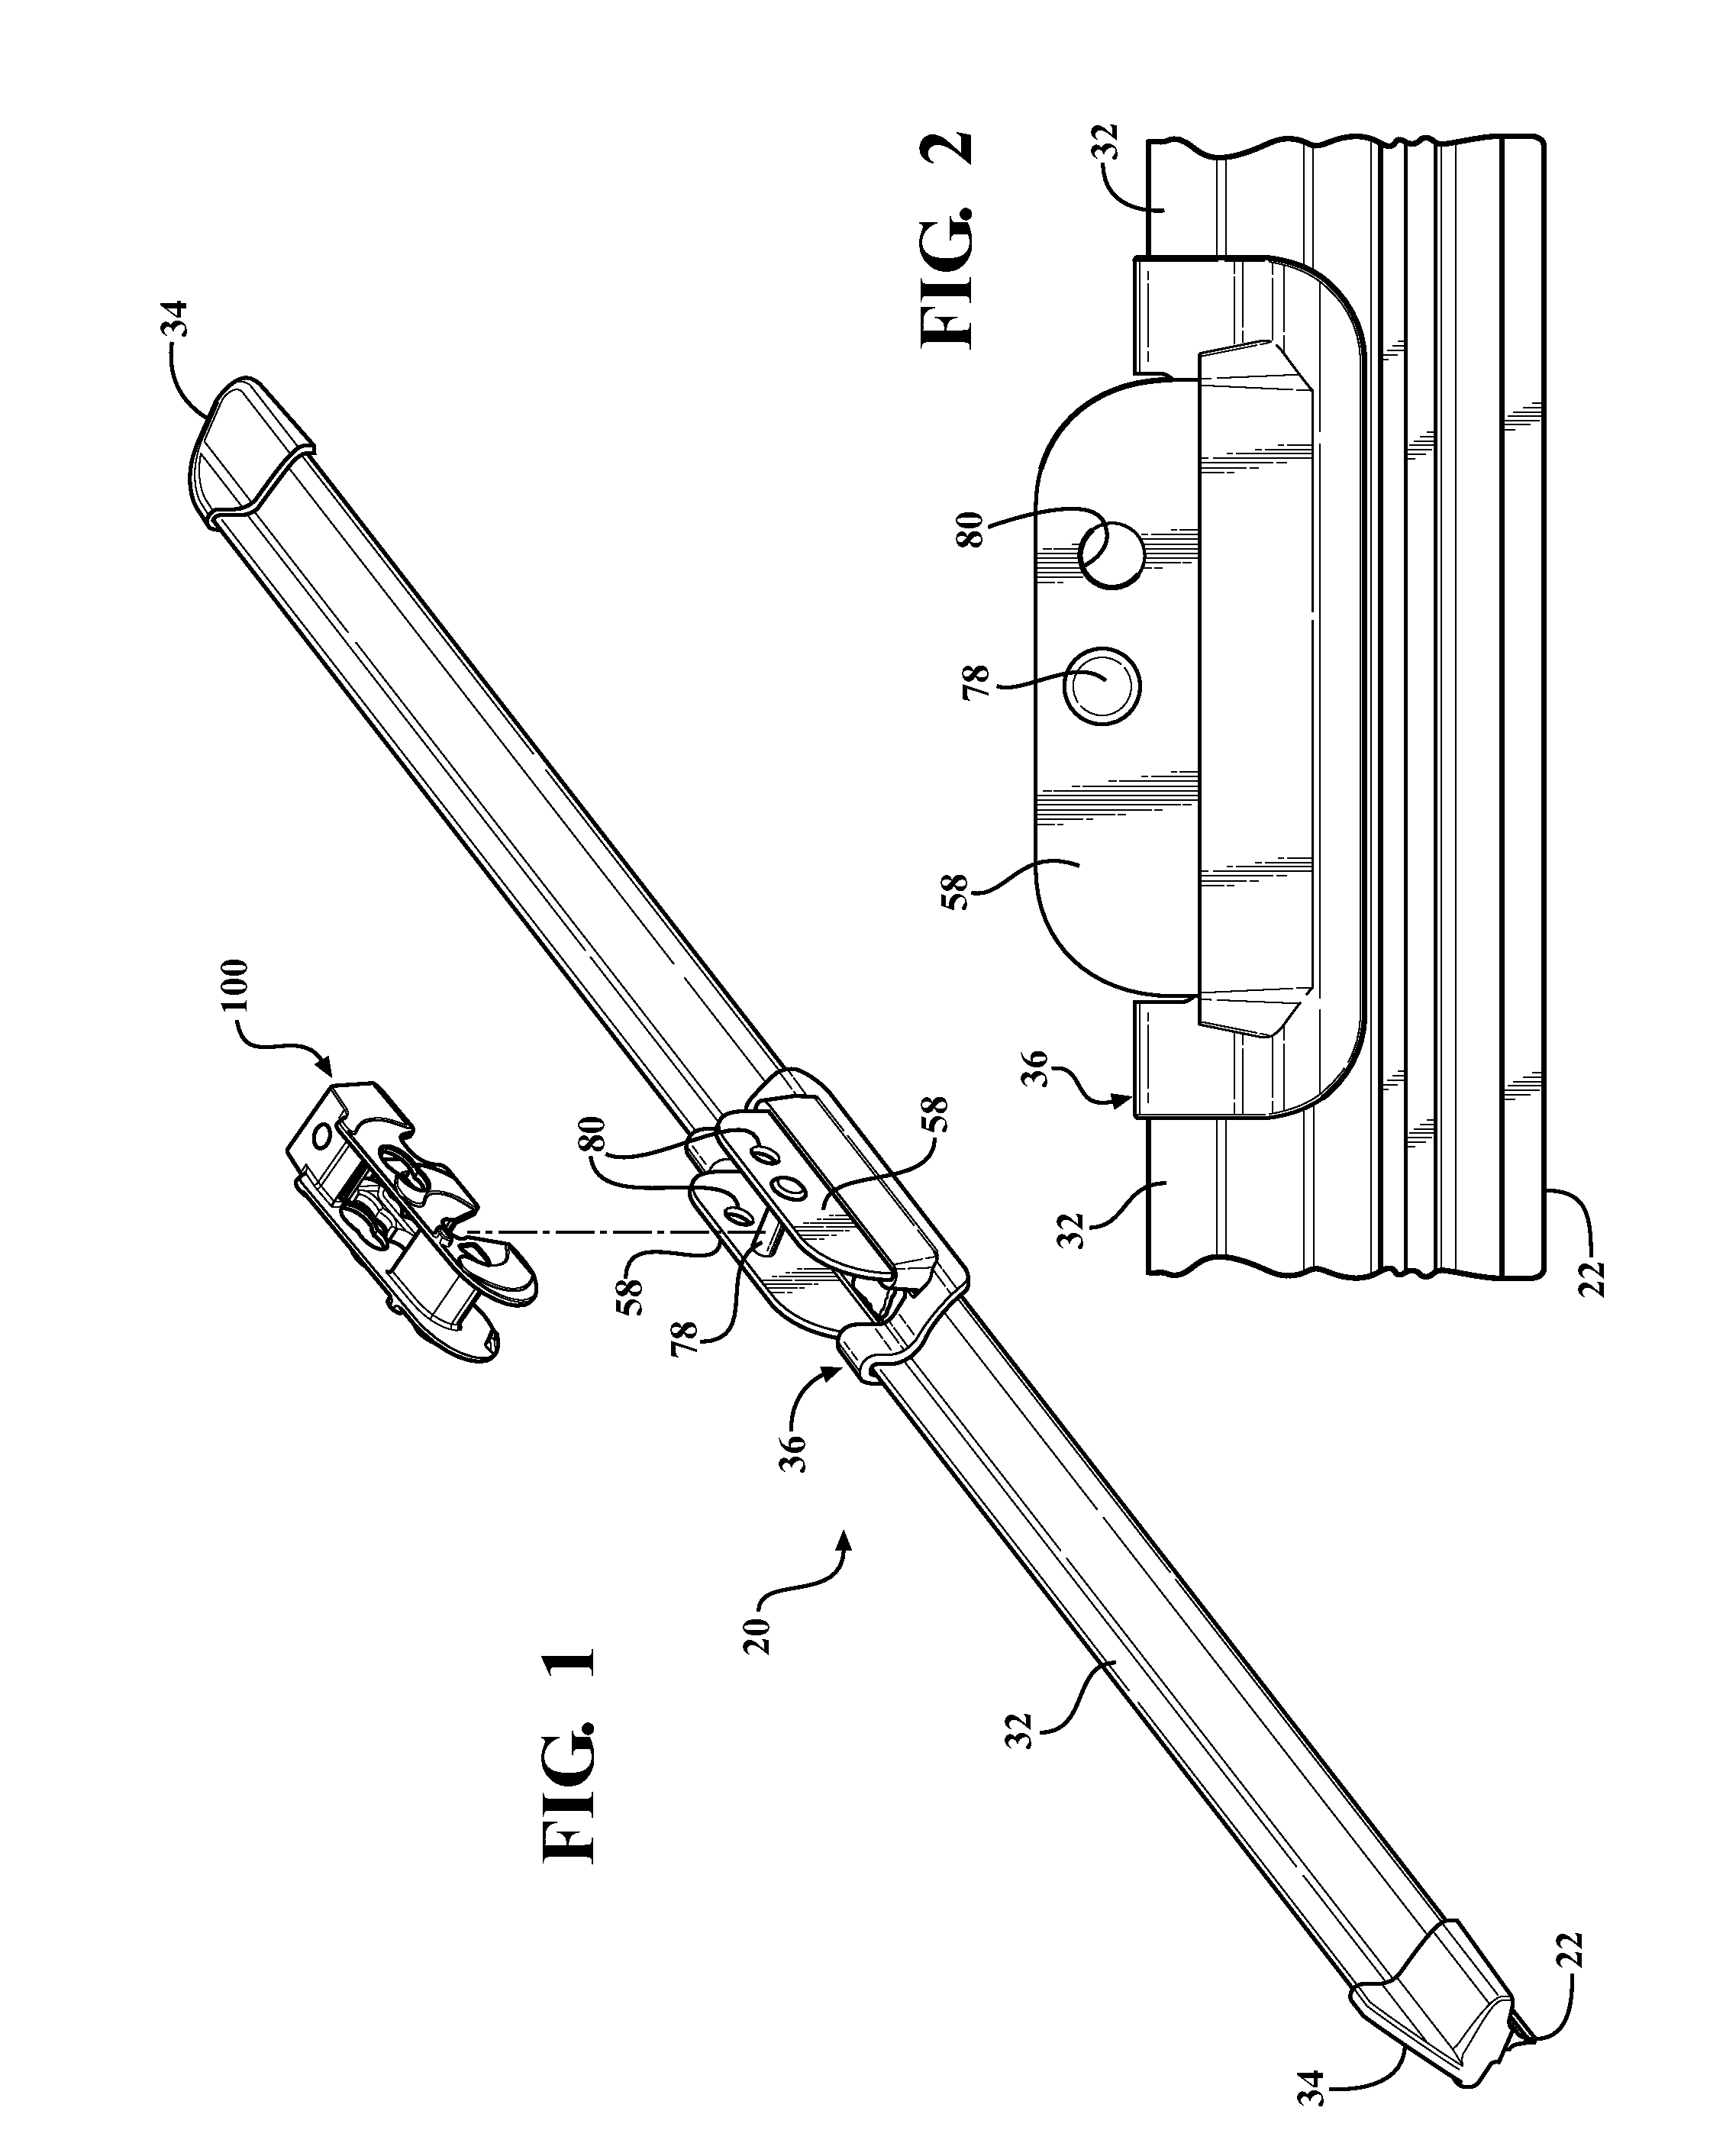 Multifunction wiper blade connector and assembly